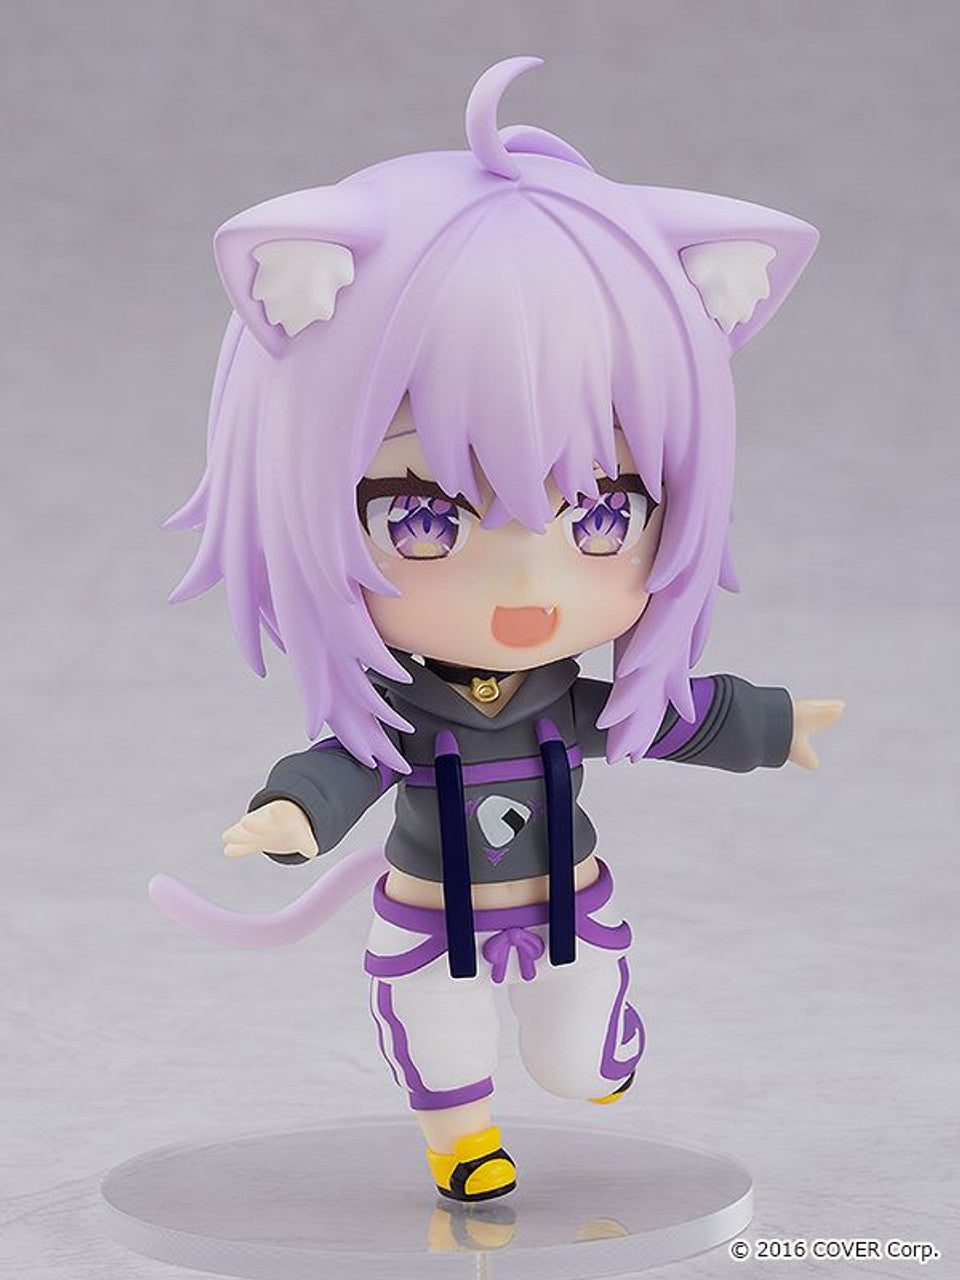 Hololive Nendoroid [1860] &quot;Nekomata Okayu&quot;-Good Smile Company-Ace Cards &amp; Collectibles